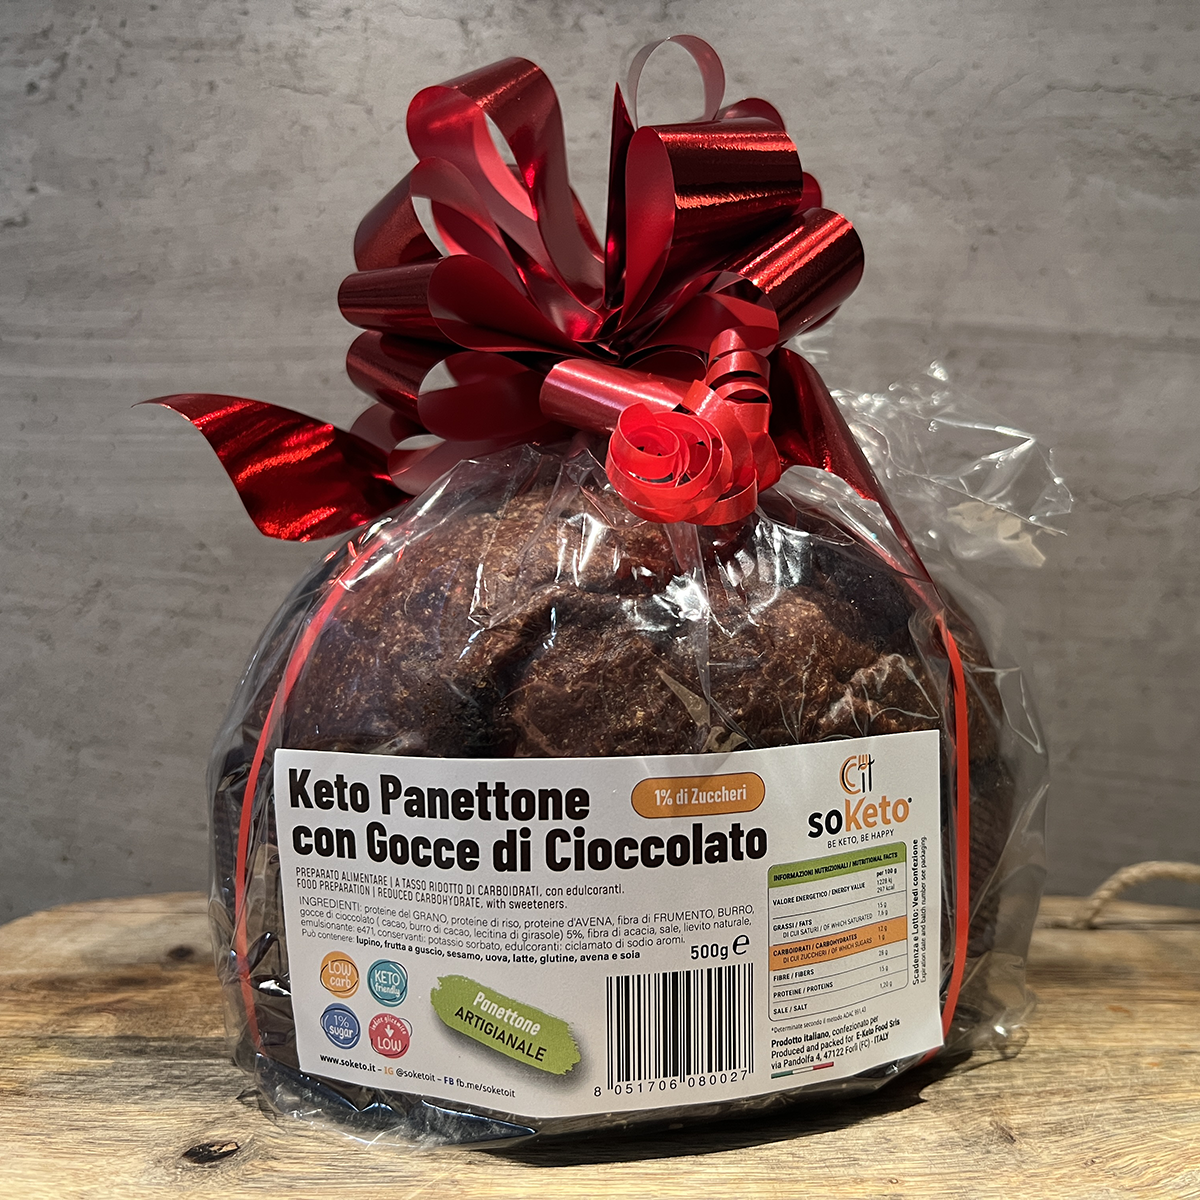 Ketogenic and low carb "Reindeer" CHRISTMAS BASKET with Parmigiano Reggiano di Fossa-1